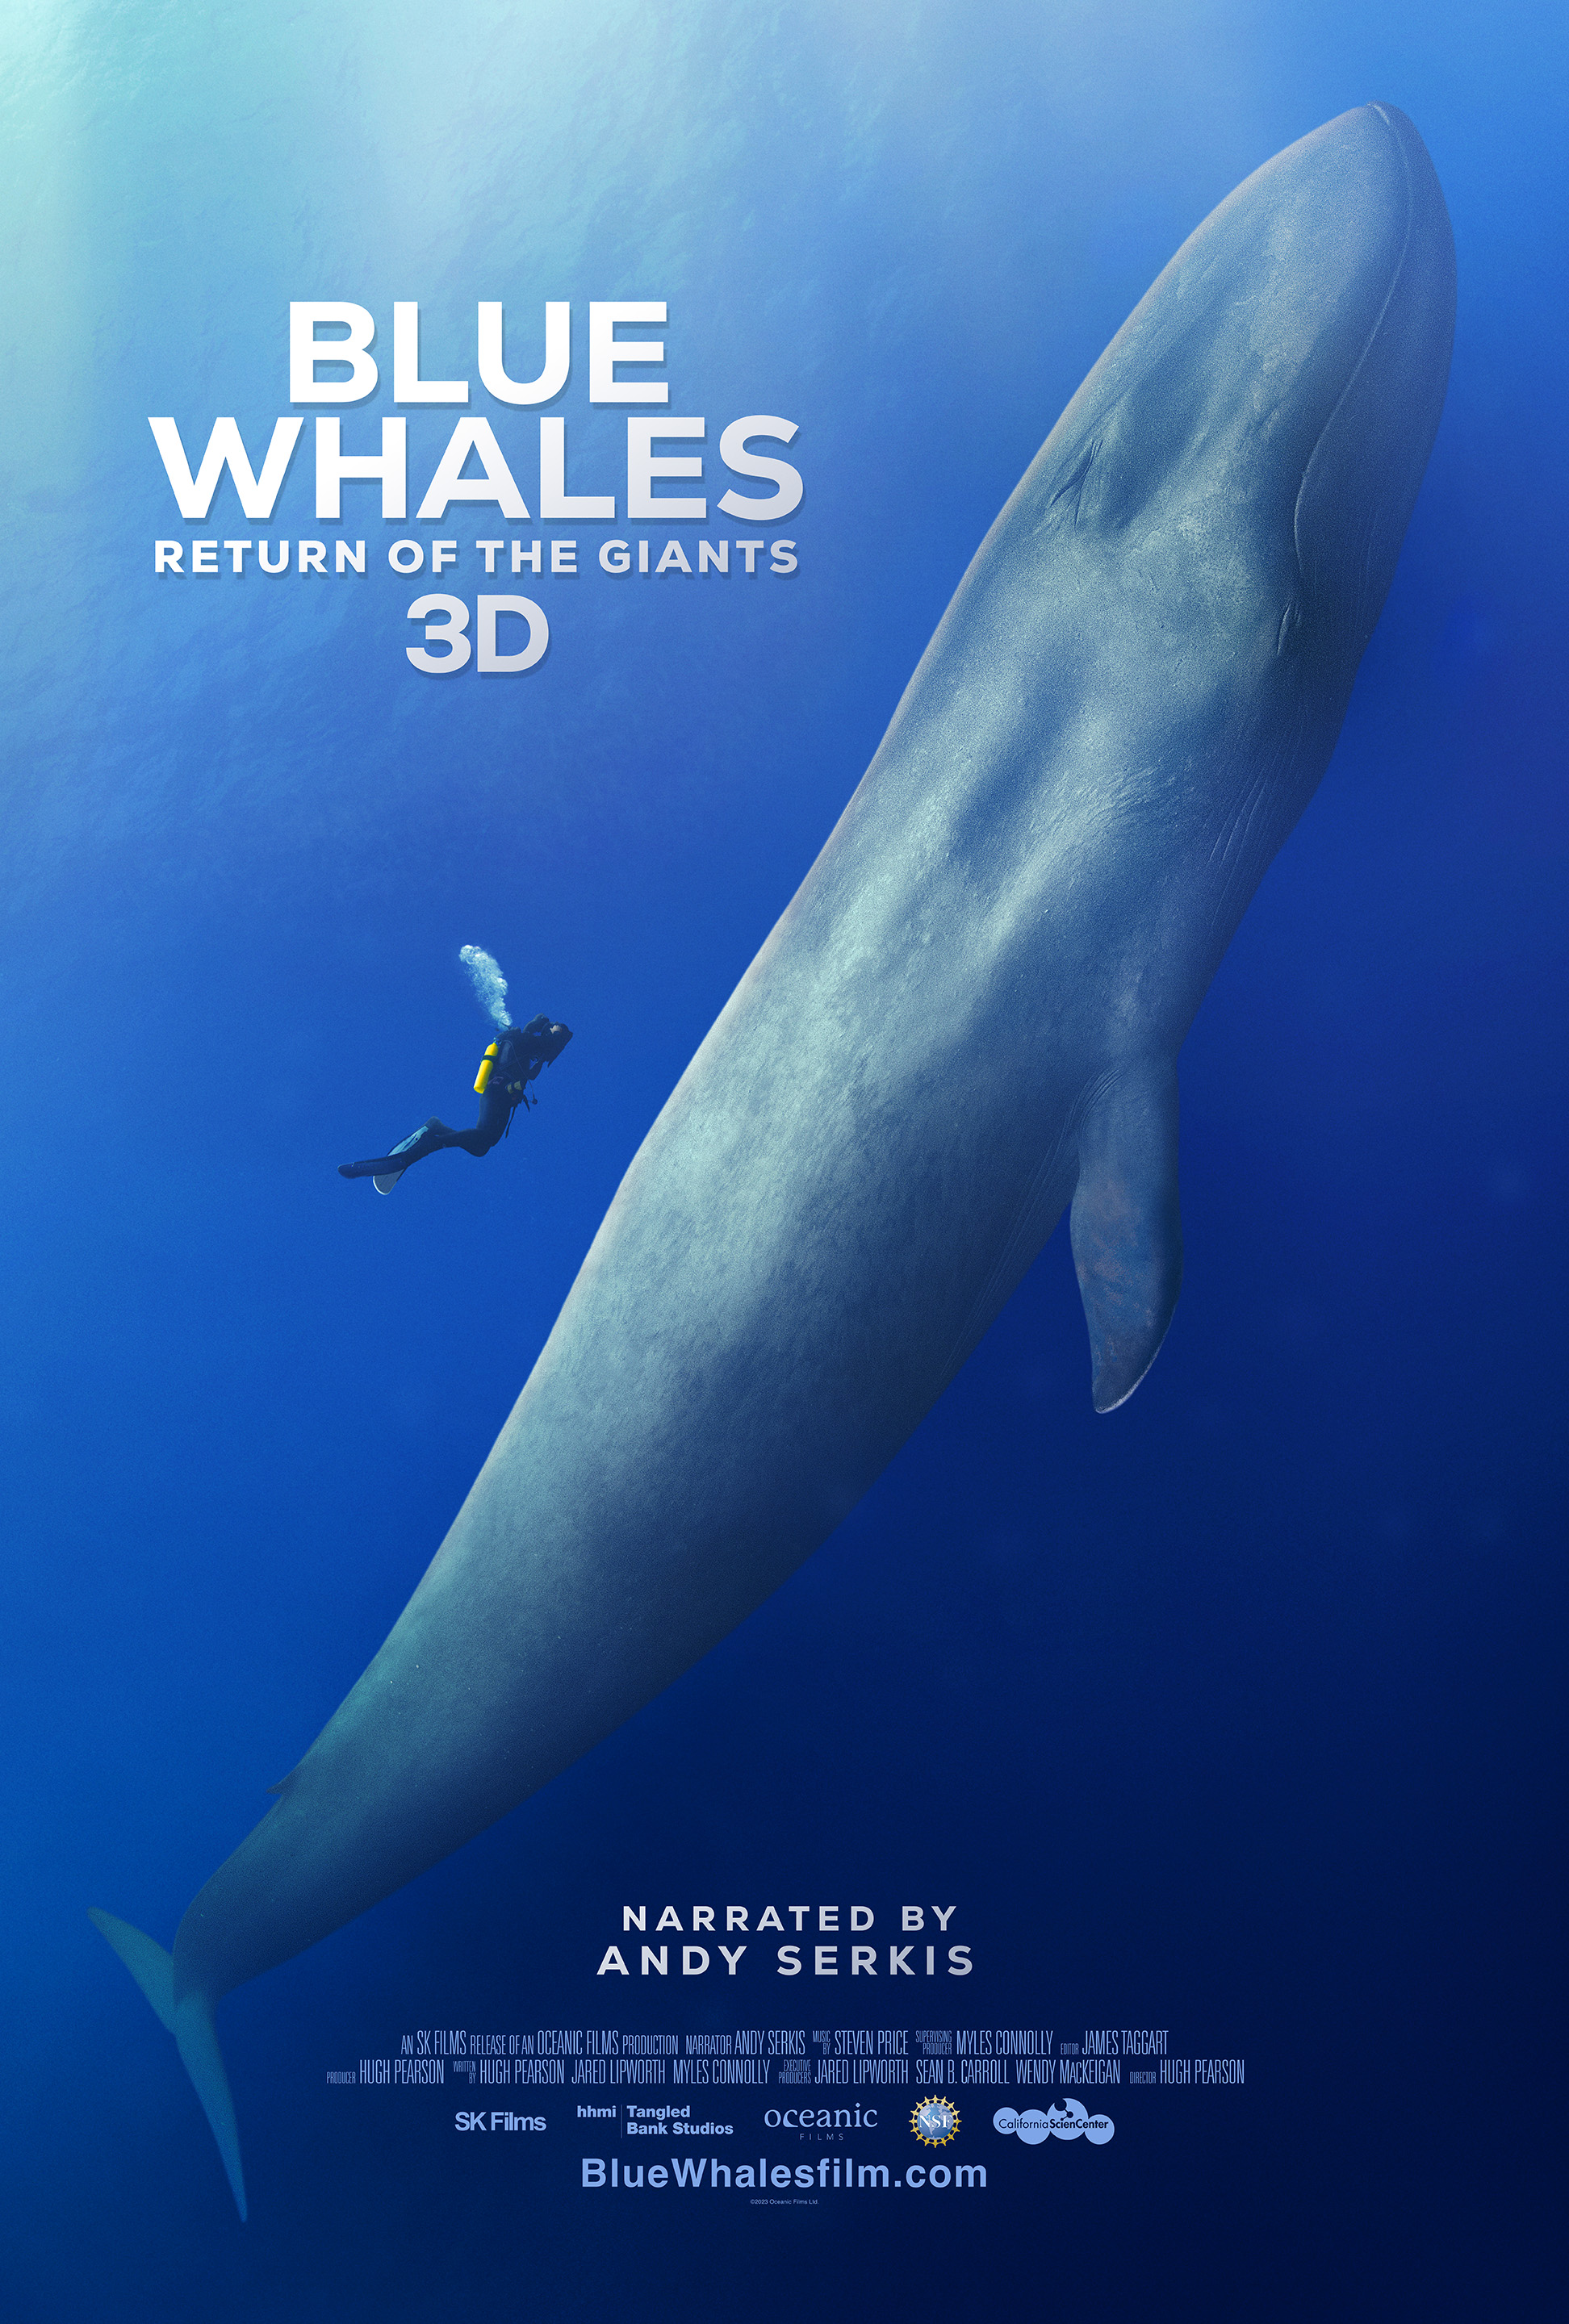 Blue Whales movie poster featuring diver alongside giant blue whale in the ocean.